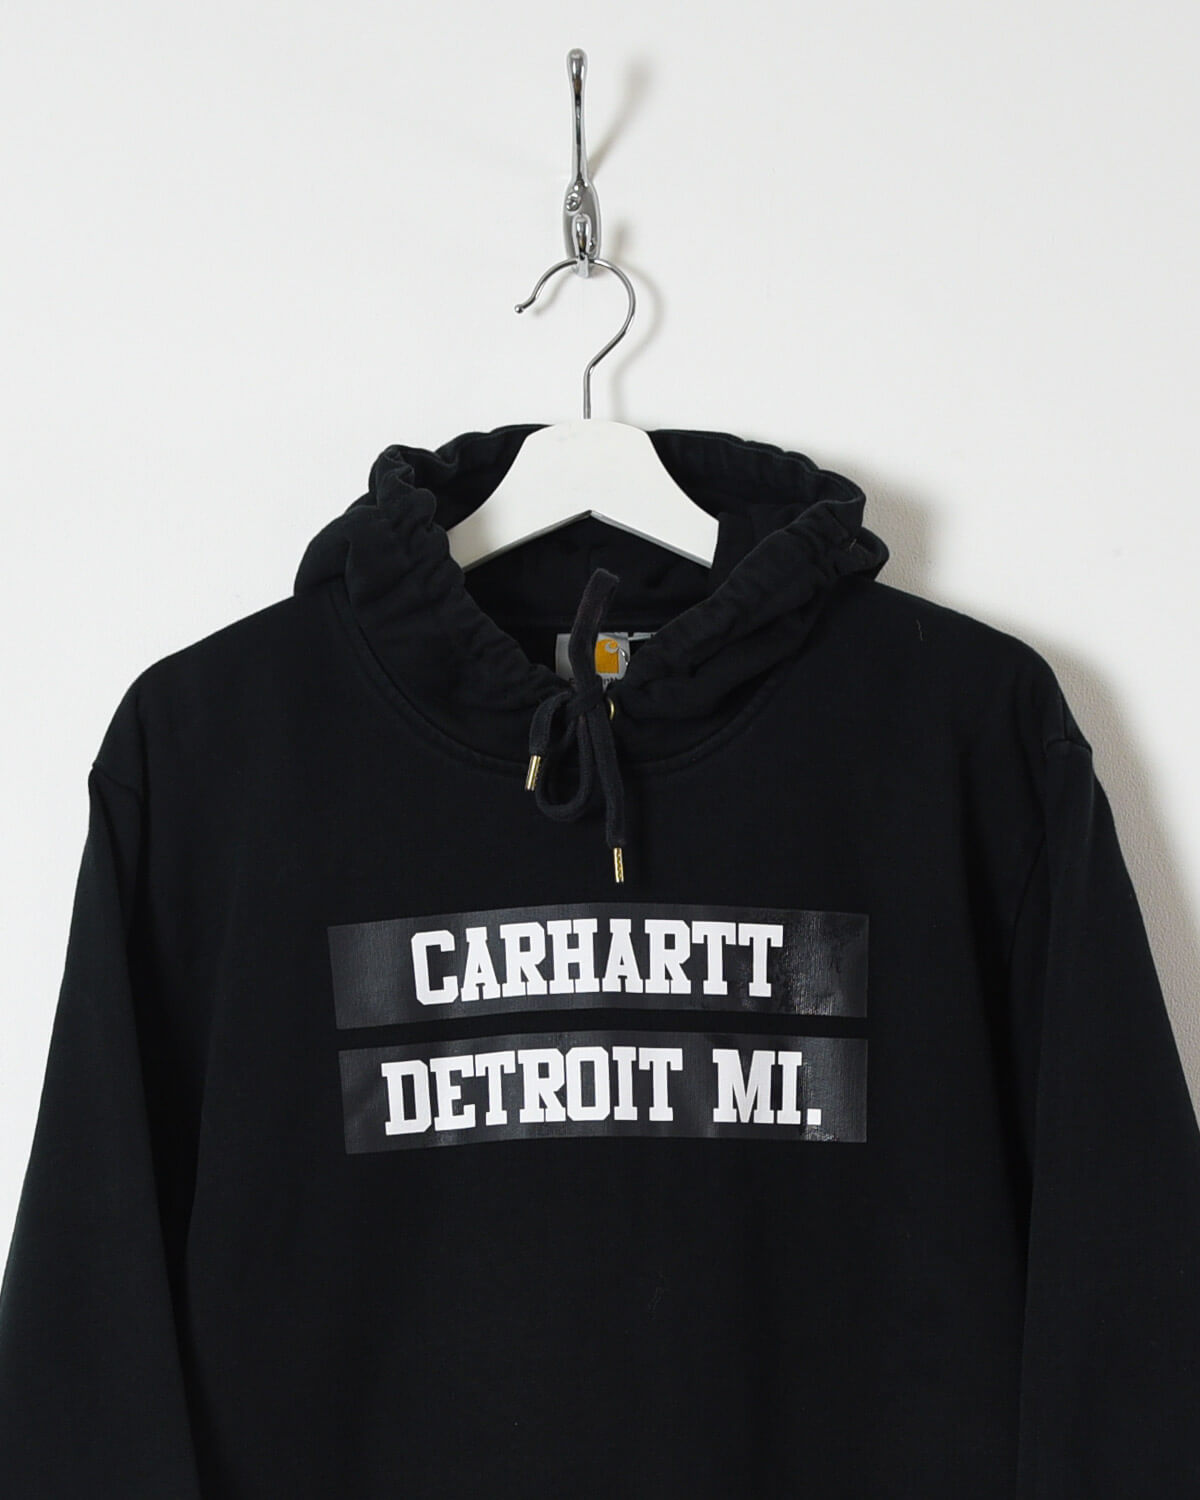 Carhartt Detroit MI. Hoodie - Large - Domno Vintage 90s, 80s, 00s Retro and Vintage Clothing 